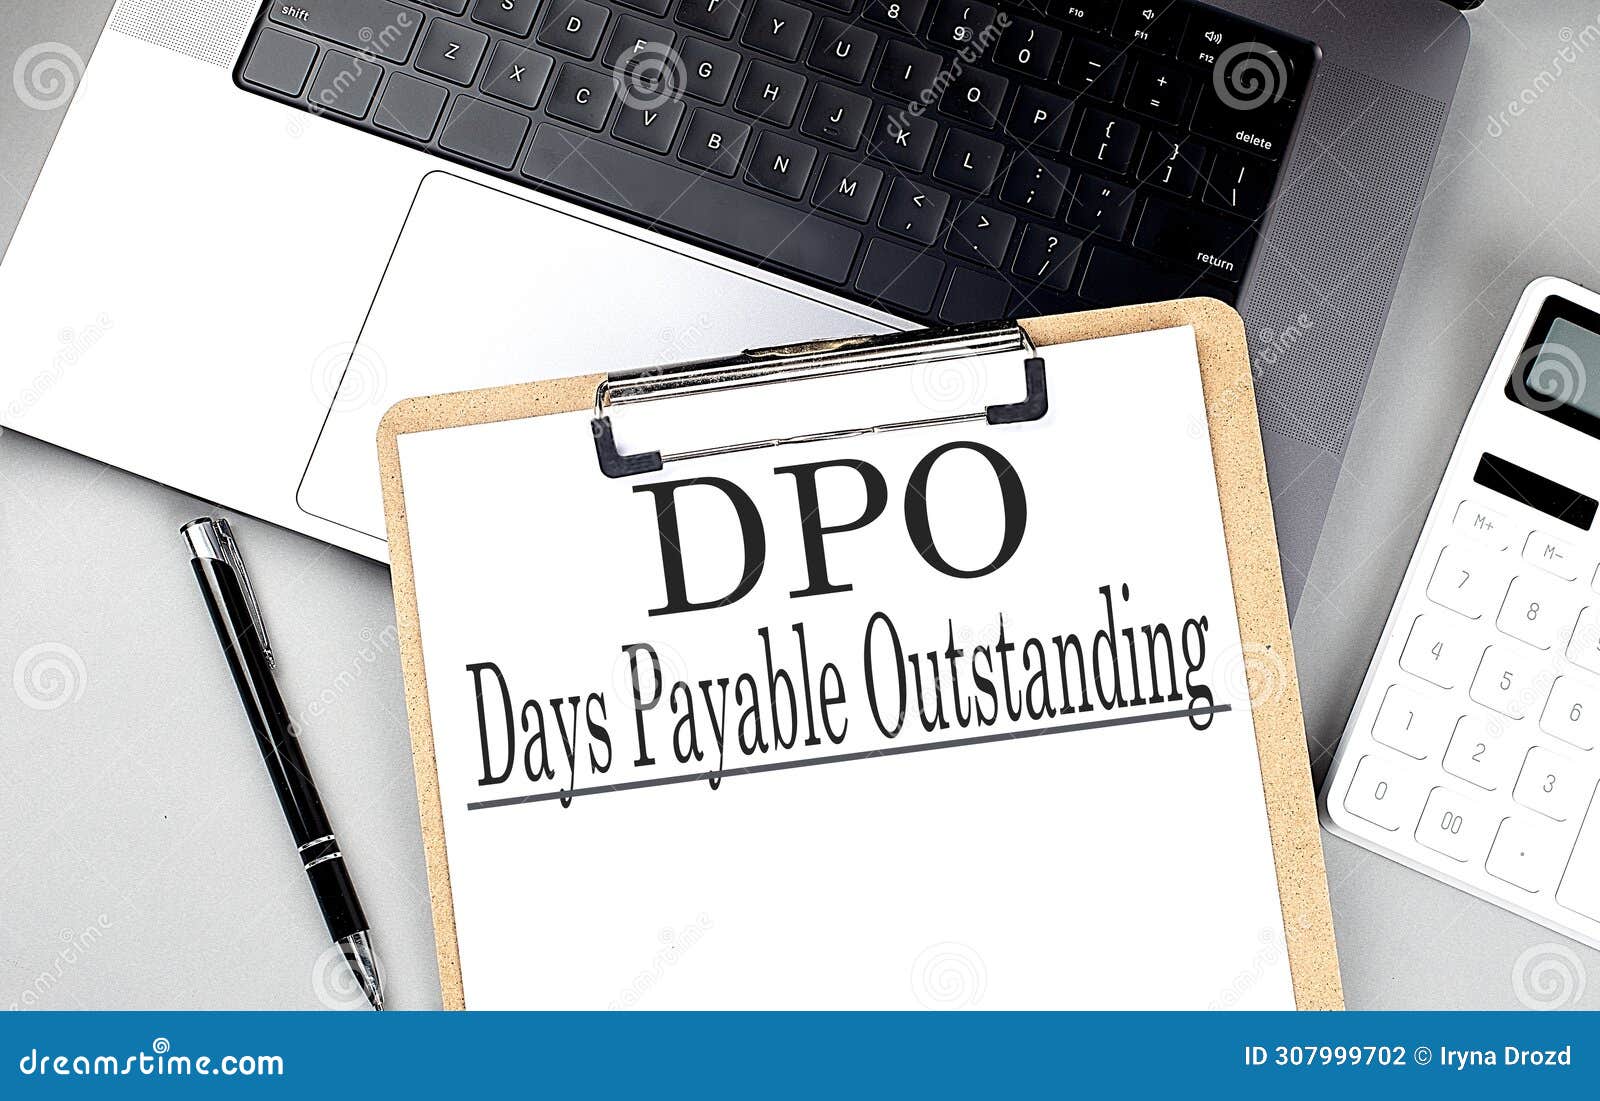 paper clipboard with dpo days payable outstanding on laptop with pen and calculator